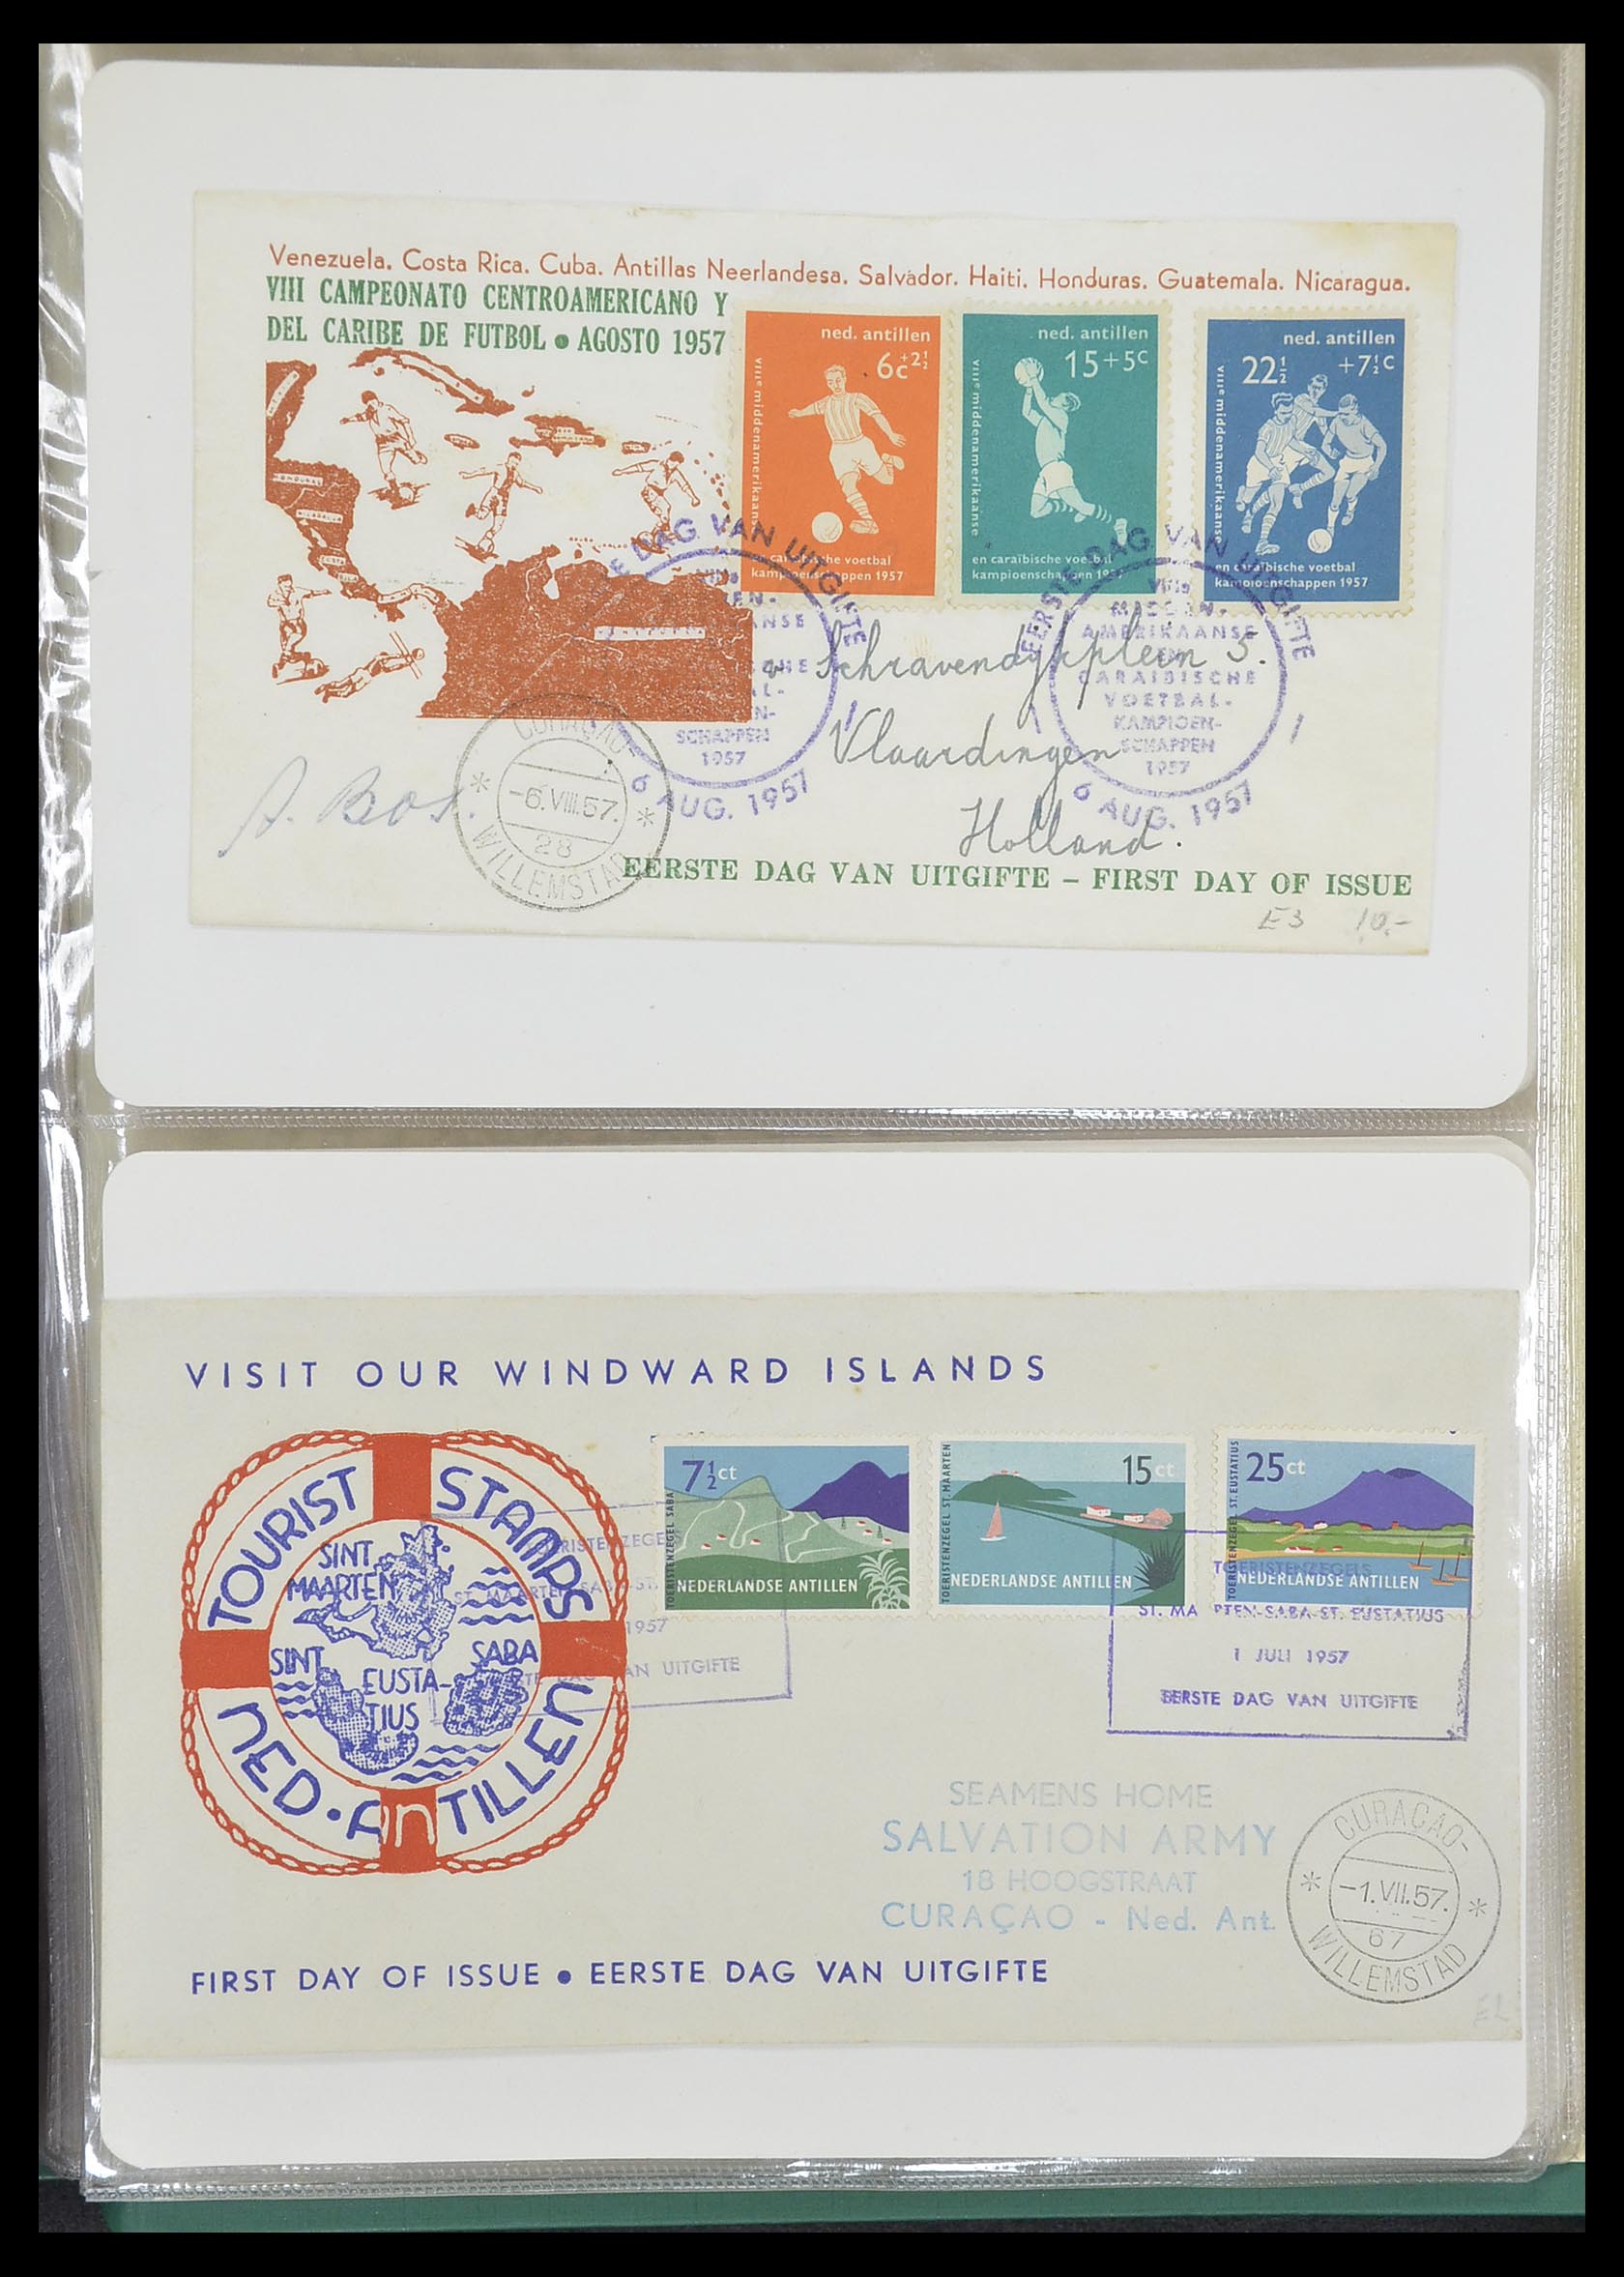 33333 076 - Stamp collection 33333 Dutch territories covers 1873-1959.